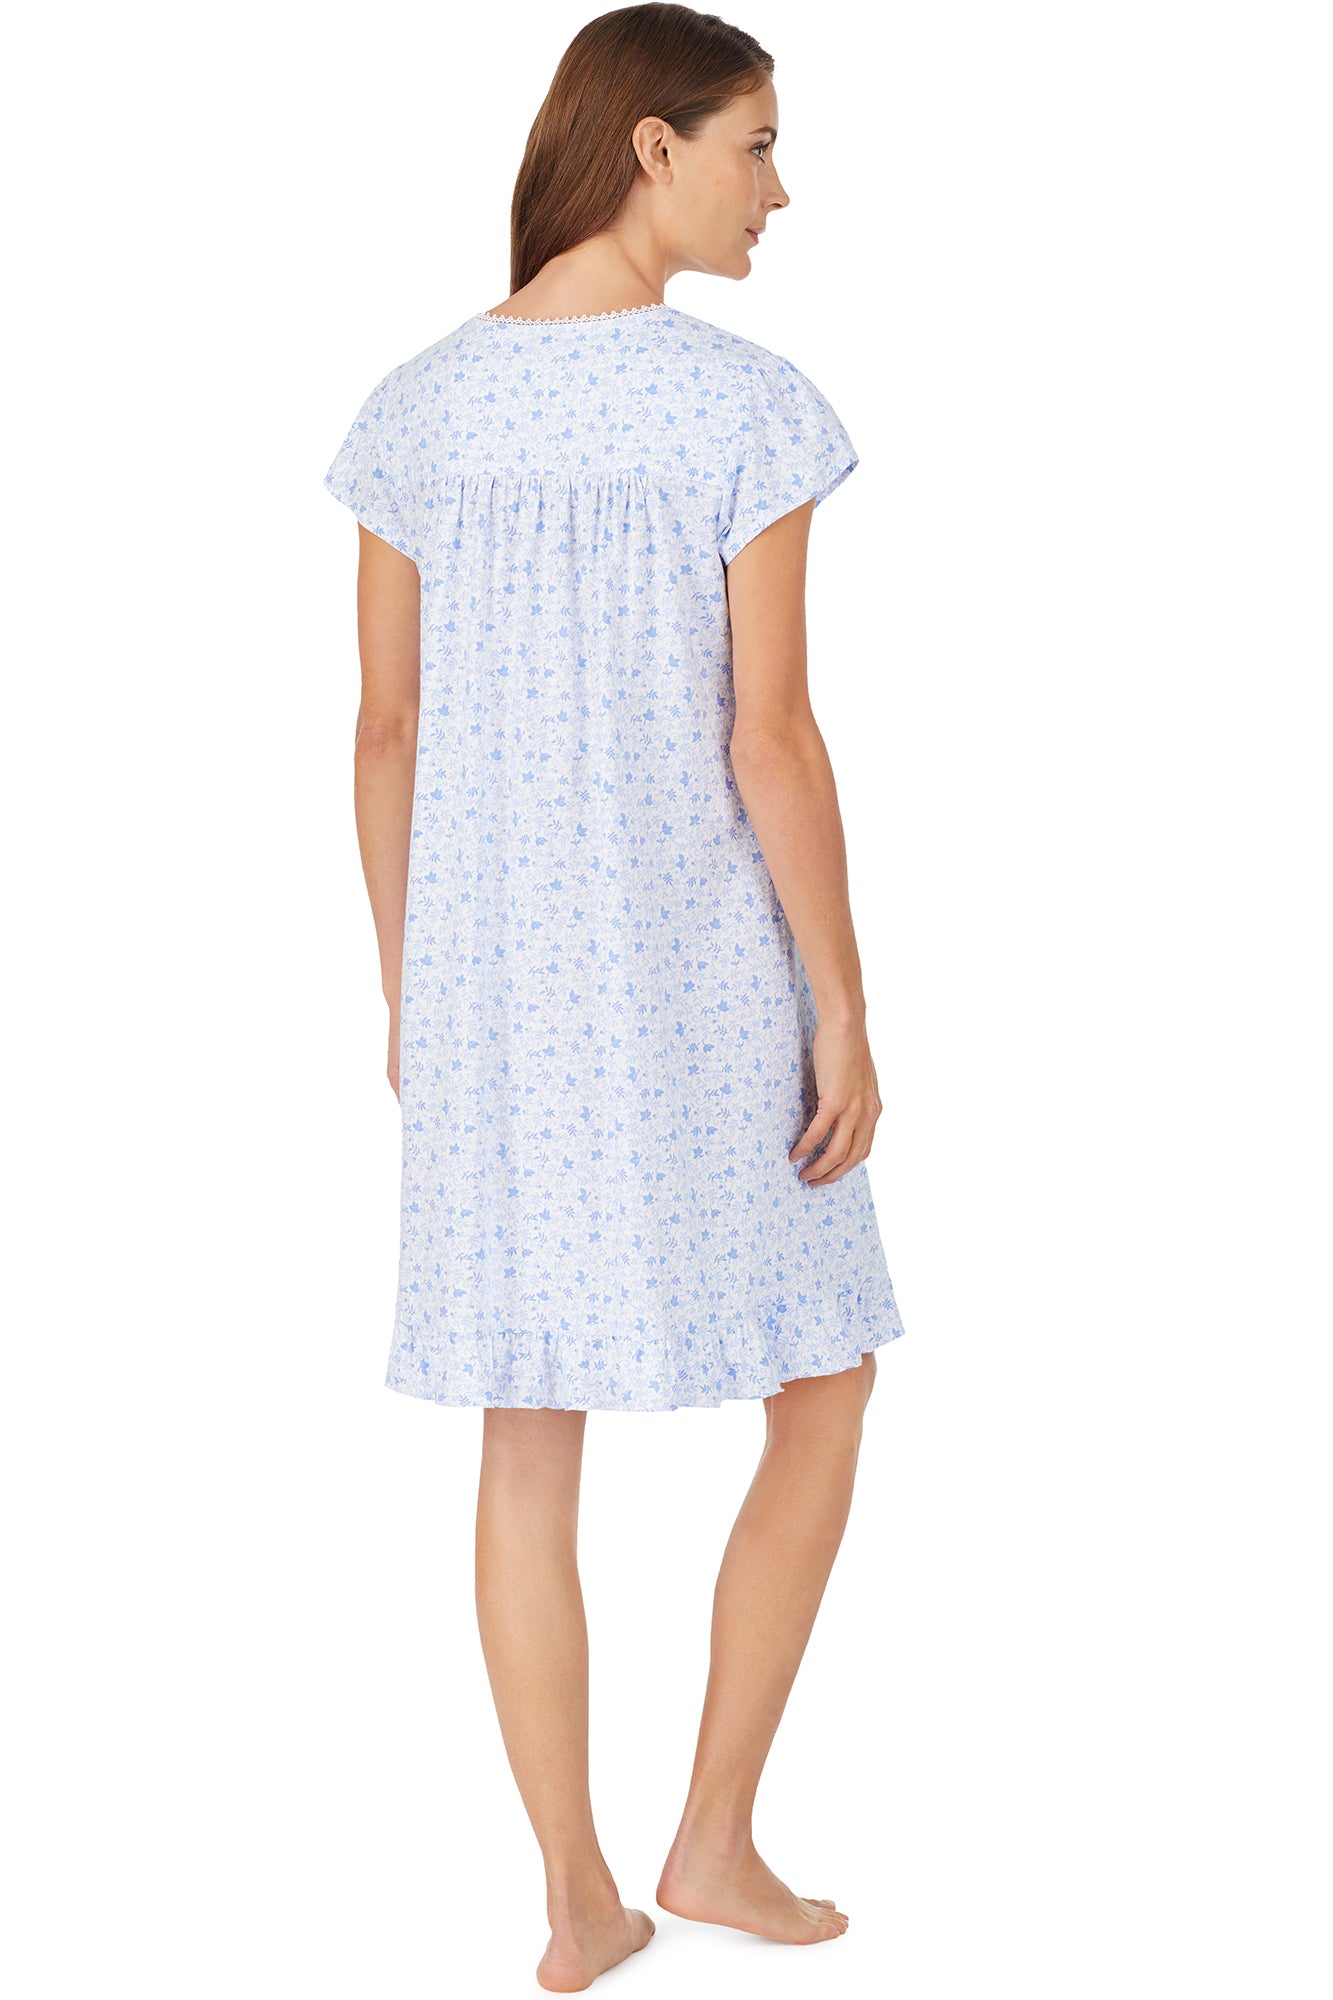 Cotton Knit Blue Floral Nightgown